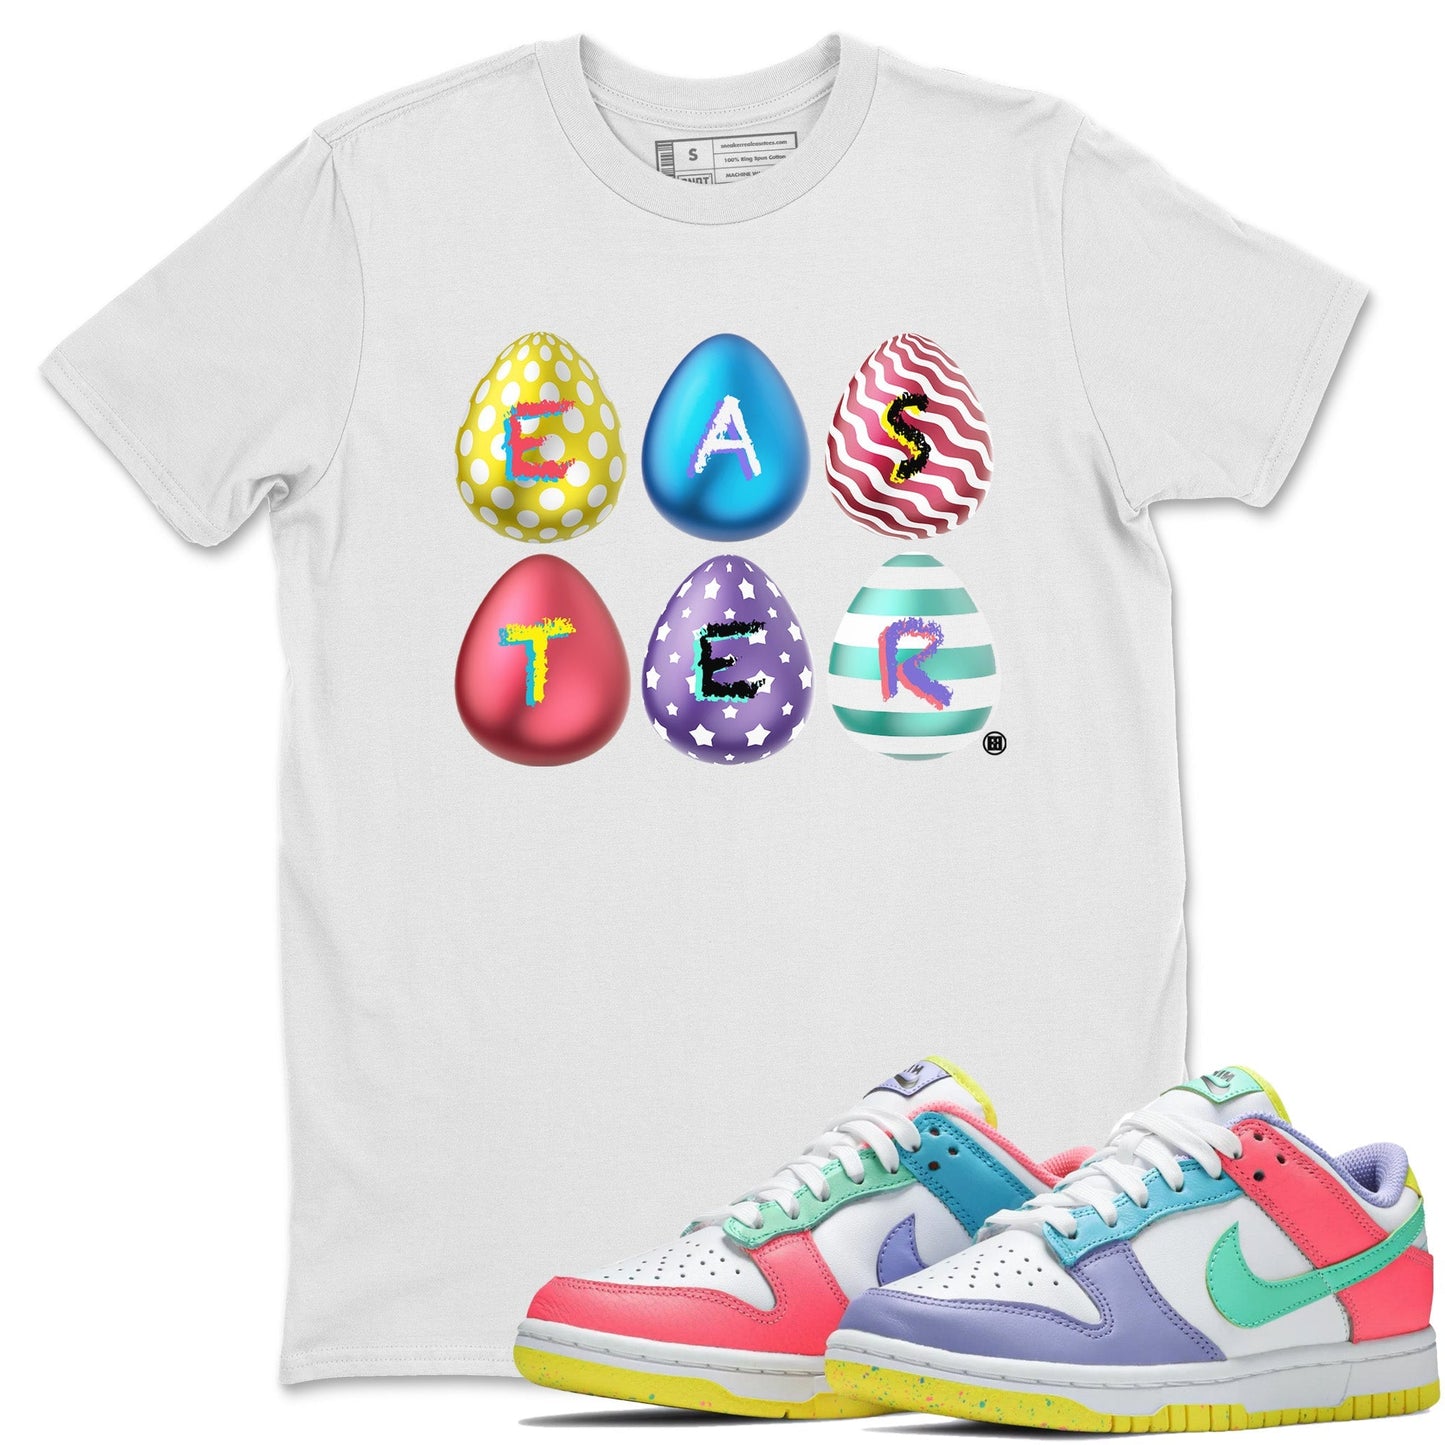 Dunk Easter Candy Sneaker Tees Drip Gear Zone Colorful Easter Sneaker Tees Holiday Easter T-Shirt Shirt Unisex Shirts White 1